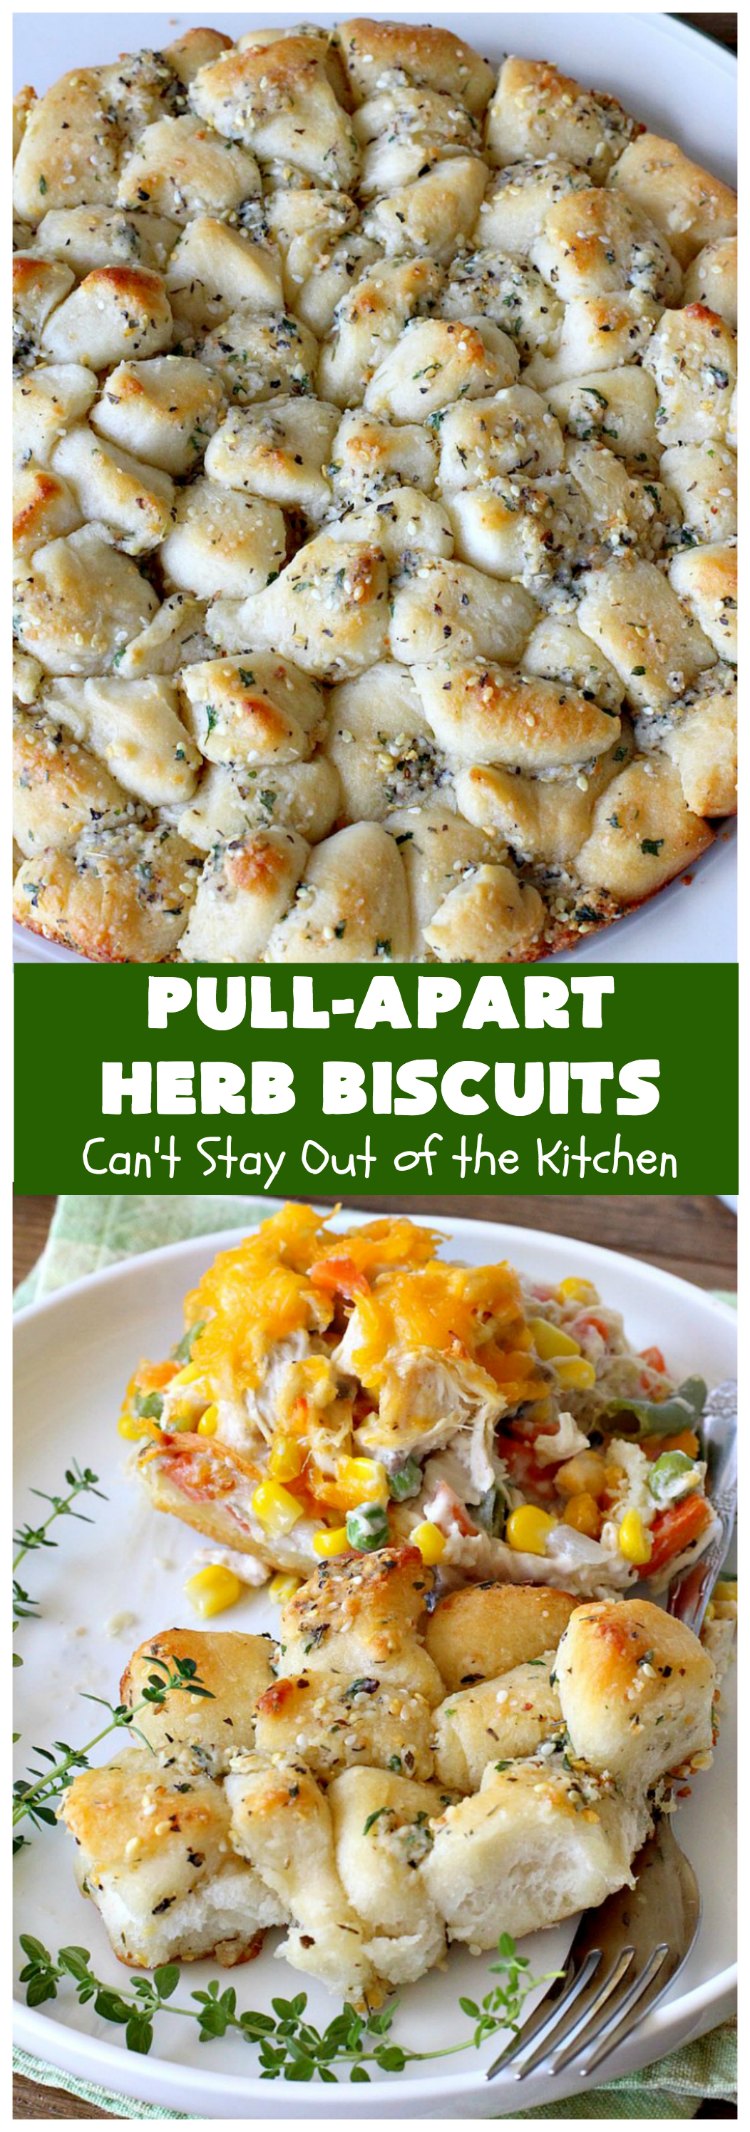 Pull-Apart Herb Biscuits | Can't Stay Out of the Kitchen